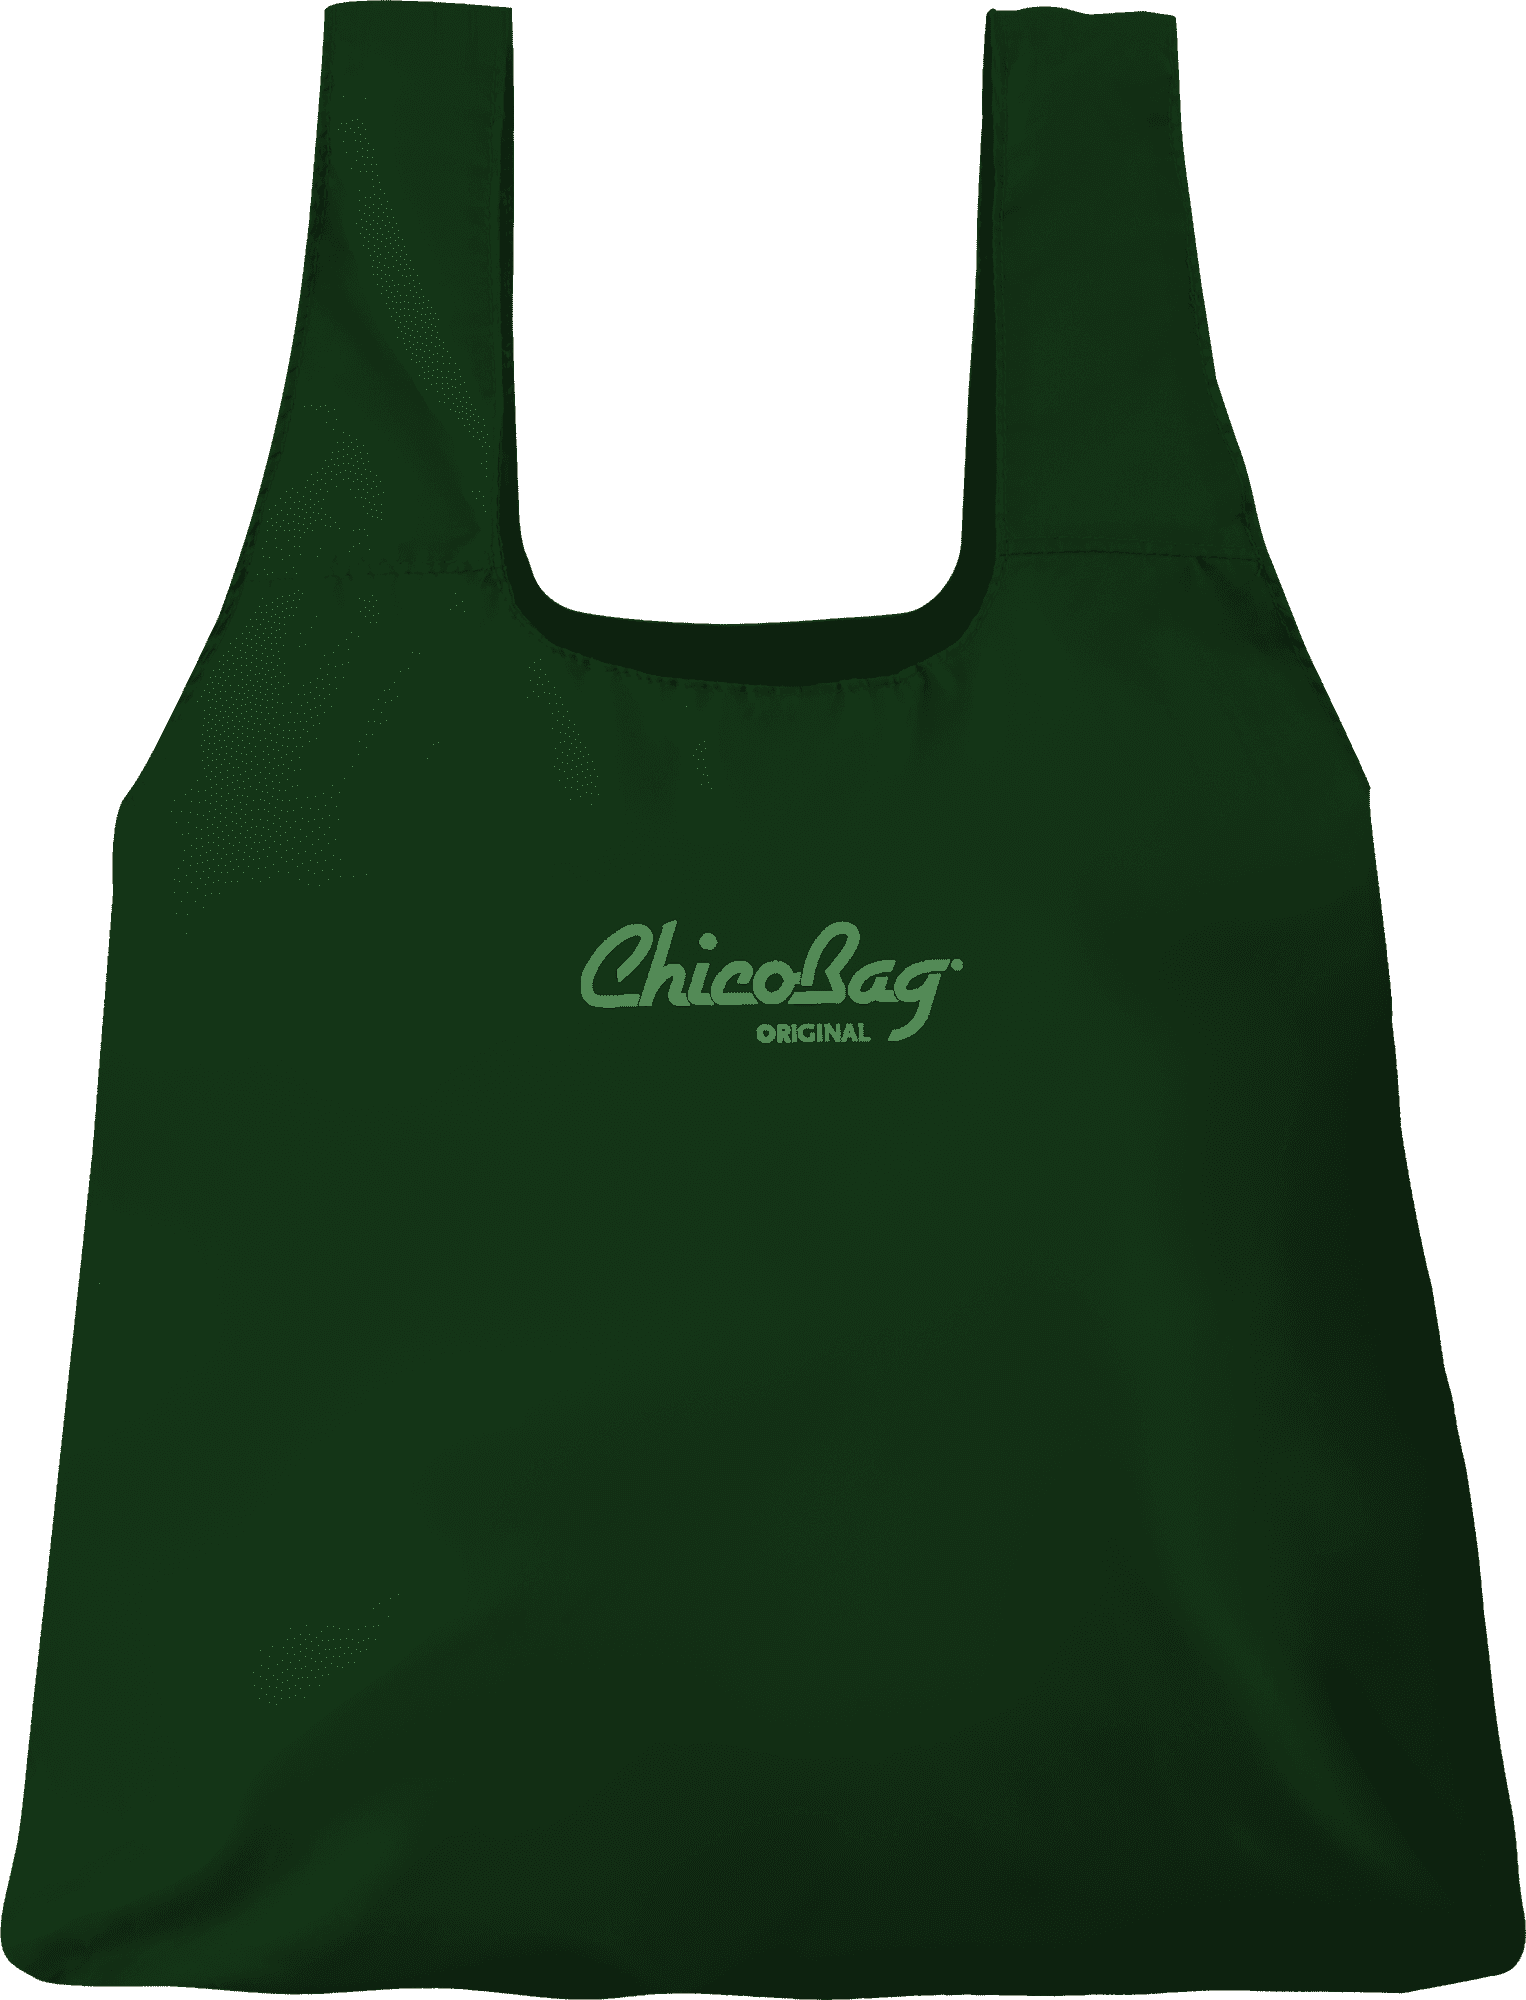 ChicoBag - Chicobag Reusable Grocery Bag with Attached Pouch and ...